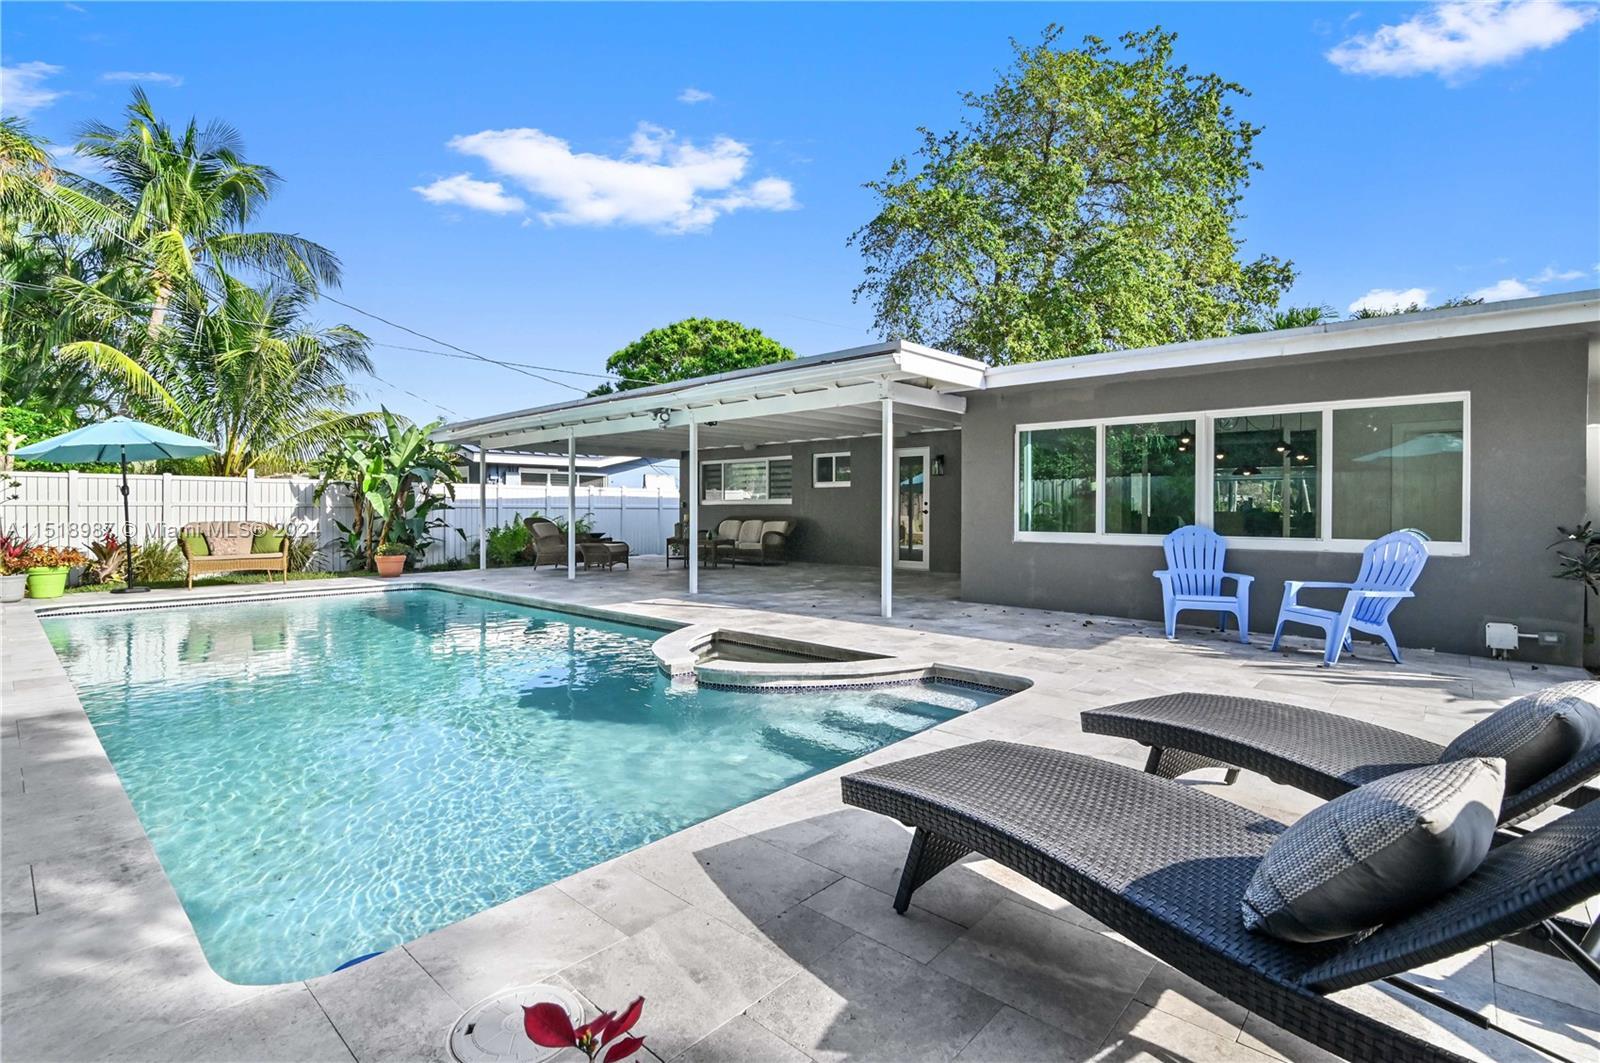 Luxury living in E. Wilton Manors is here, in this completely renovated  3 bedroom 2 bath pool 1 car